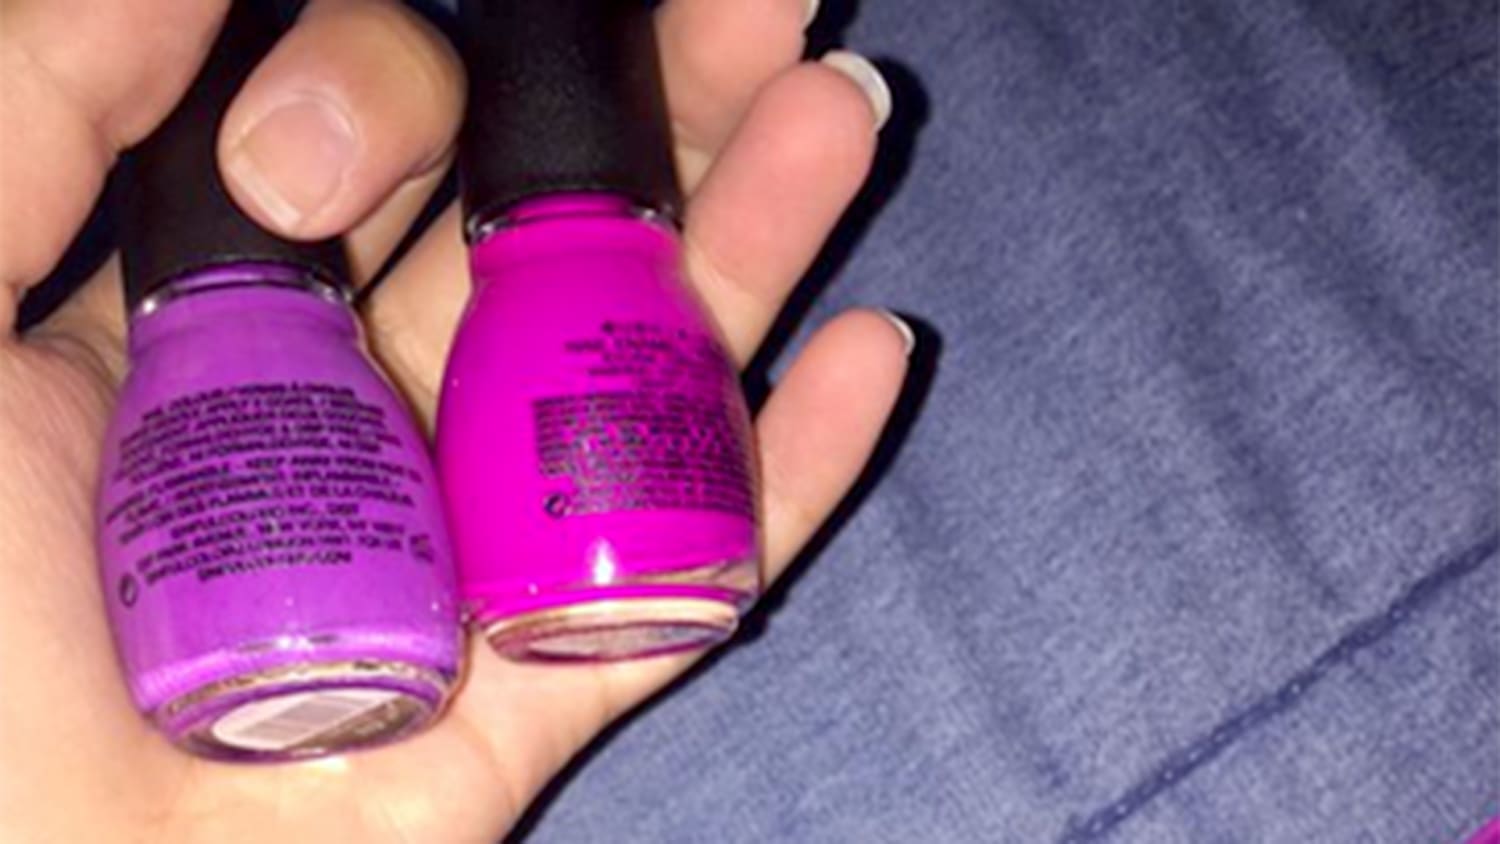 Which Nail Polish Matches This Shoe Weigh In On The Internet Debate